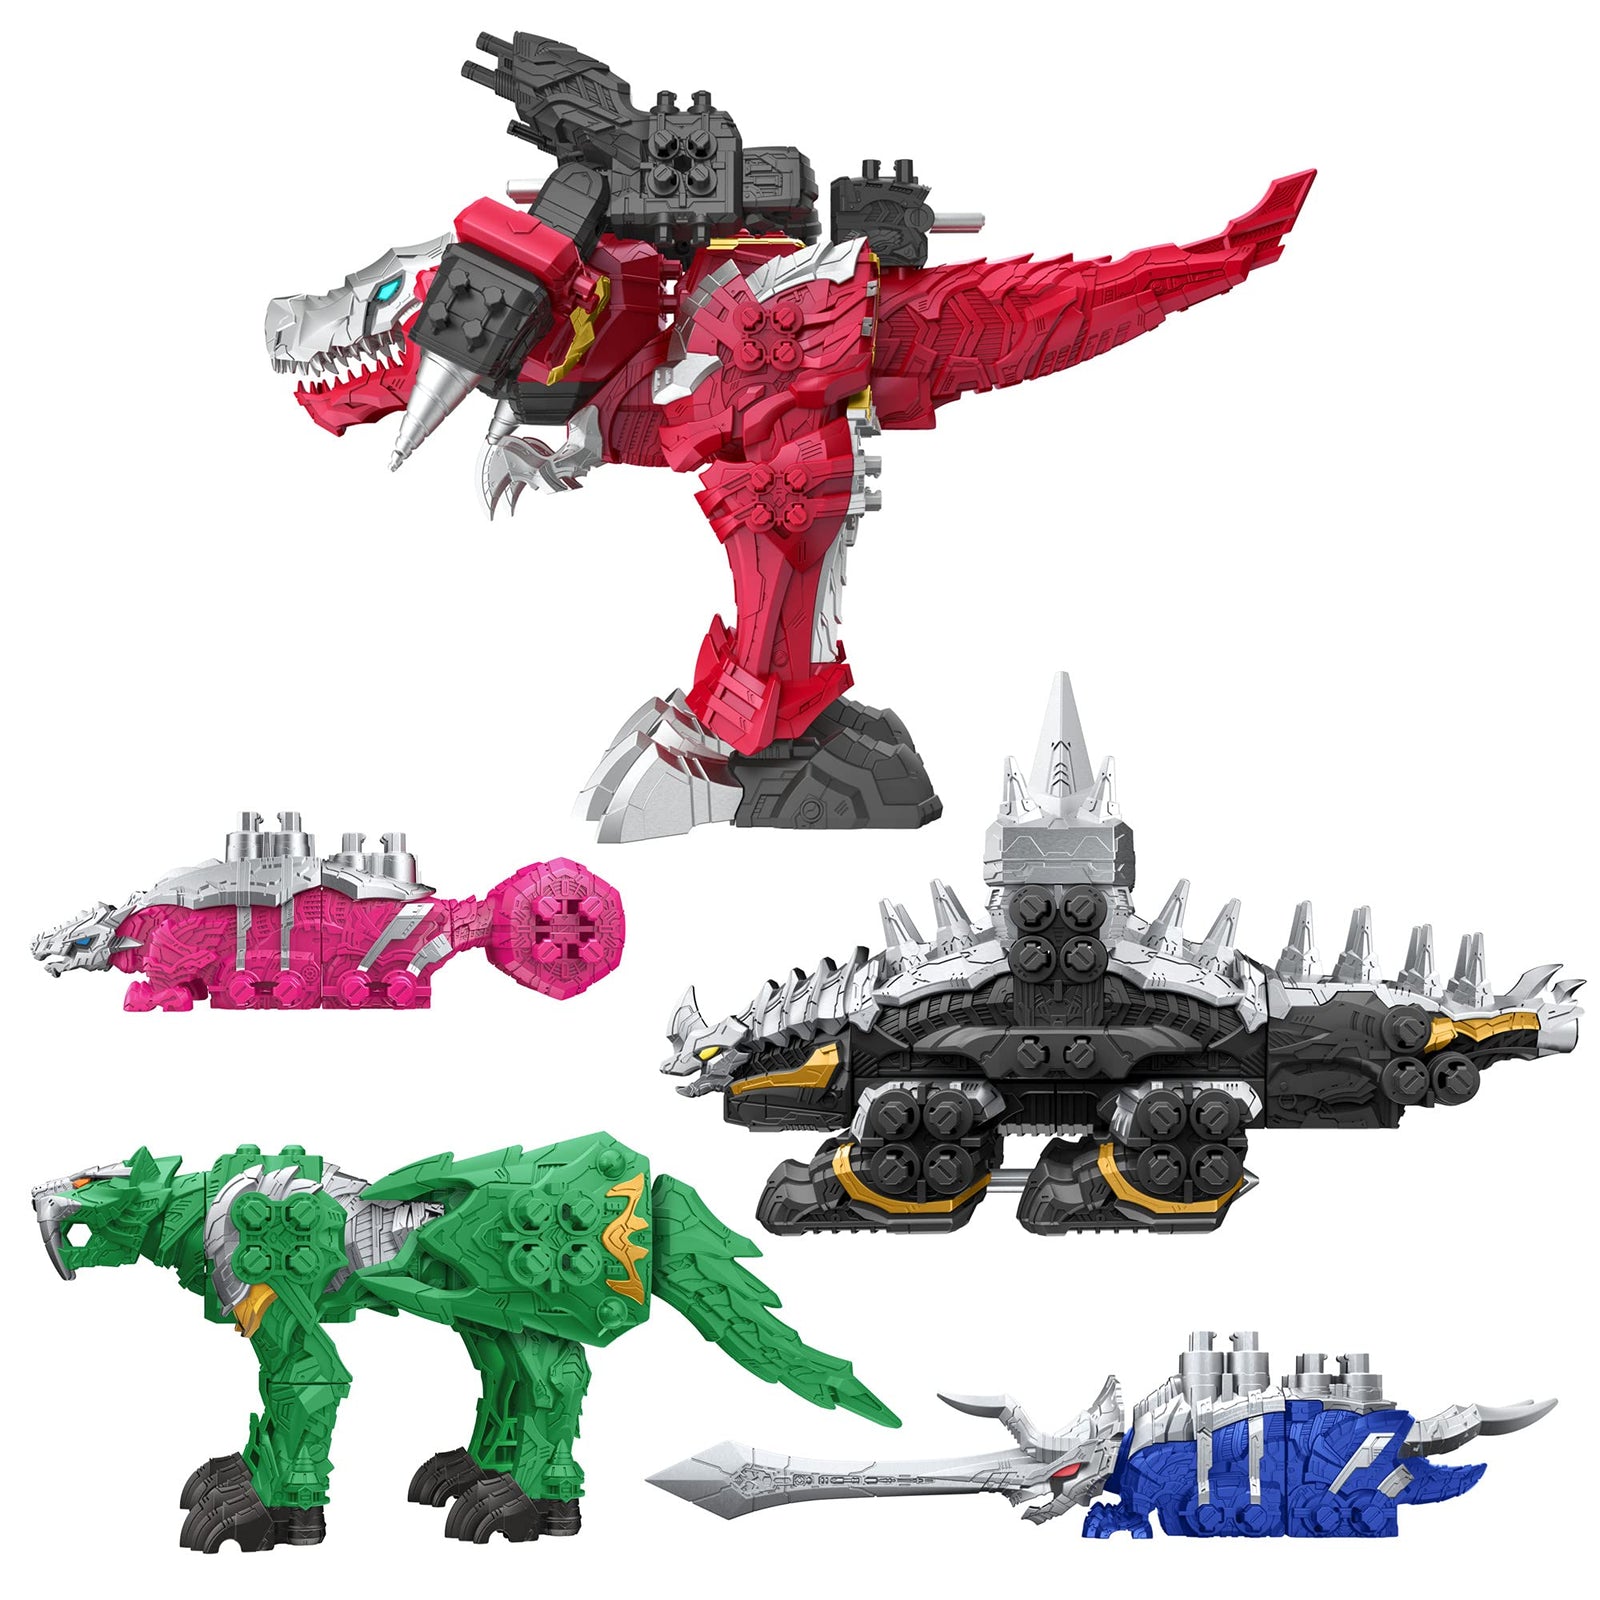 Power Rangers Dino Fury Megazord Mega Pack 5-Pack Zord Action Figure Toys for Kids Ages 4 and Up Zord Link Mix-and-Match Custom Build System (Amazon Exclusive)